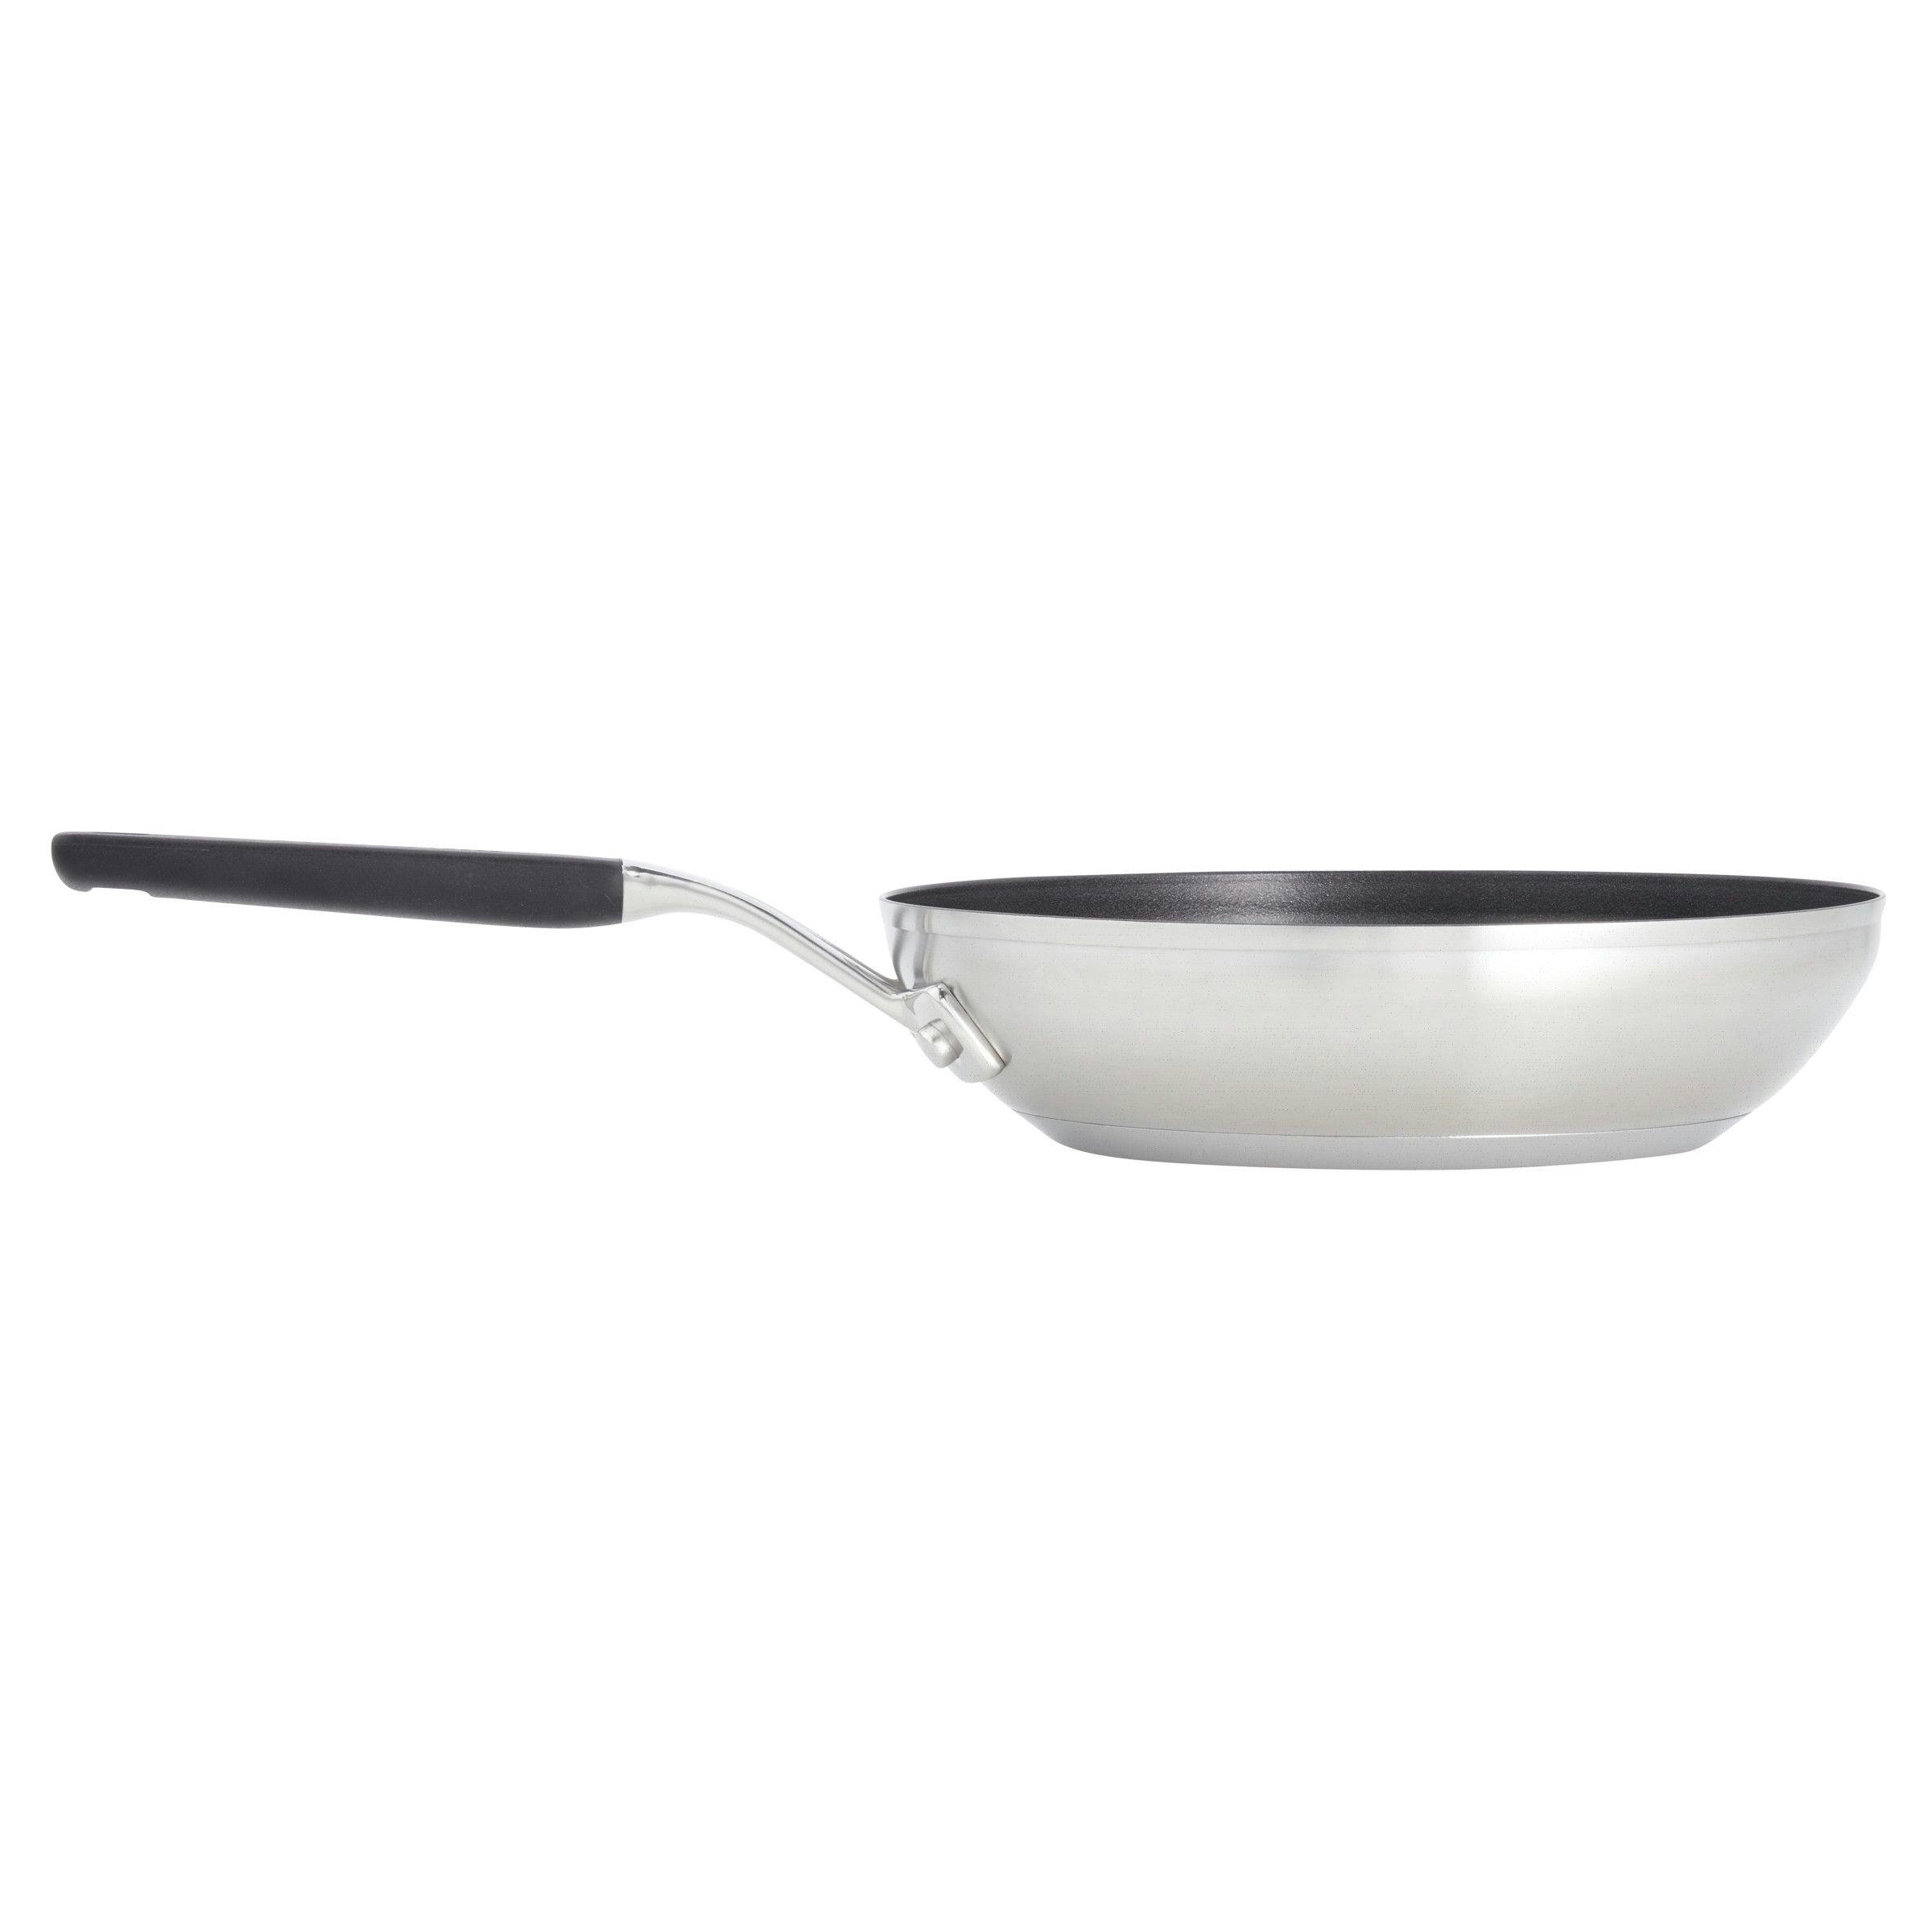 KitchenAid Stainless Steel Nonstick Induction Frying Pan, 8-Inch, Brushed Stainless Steel